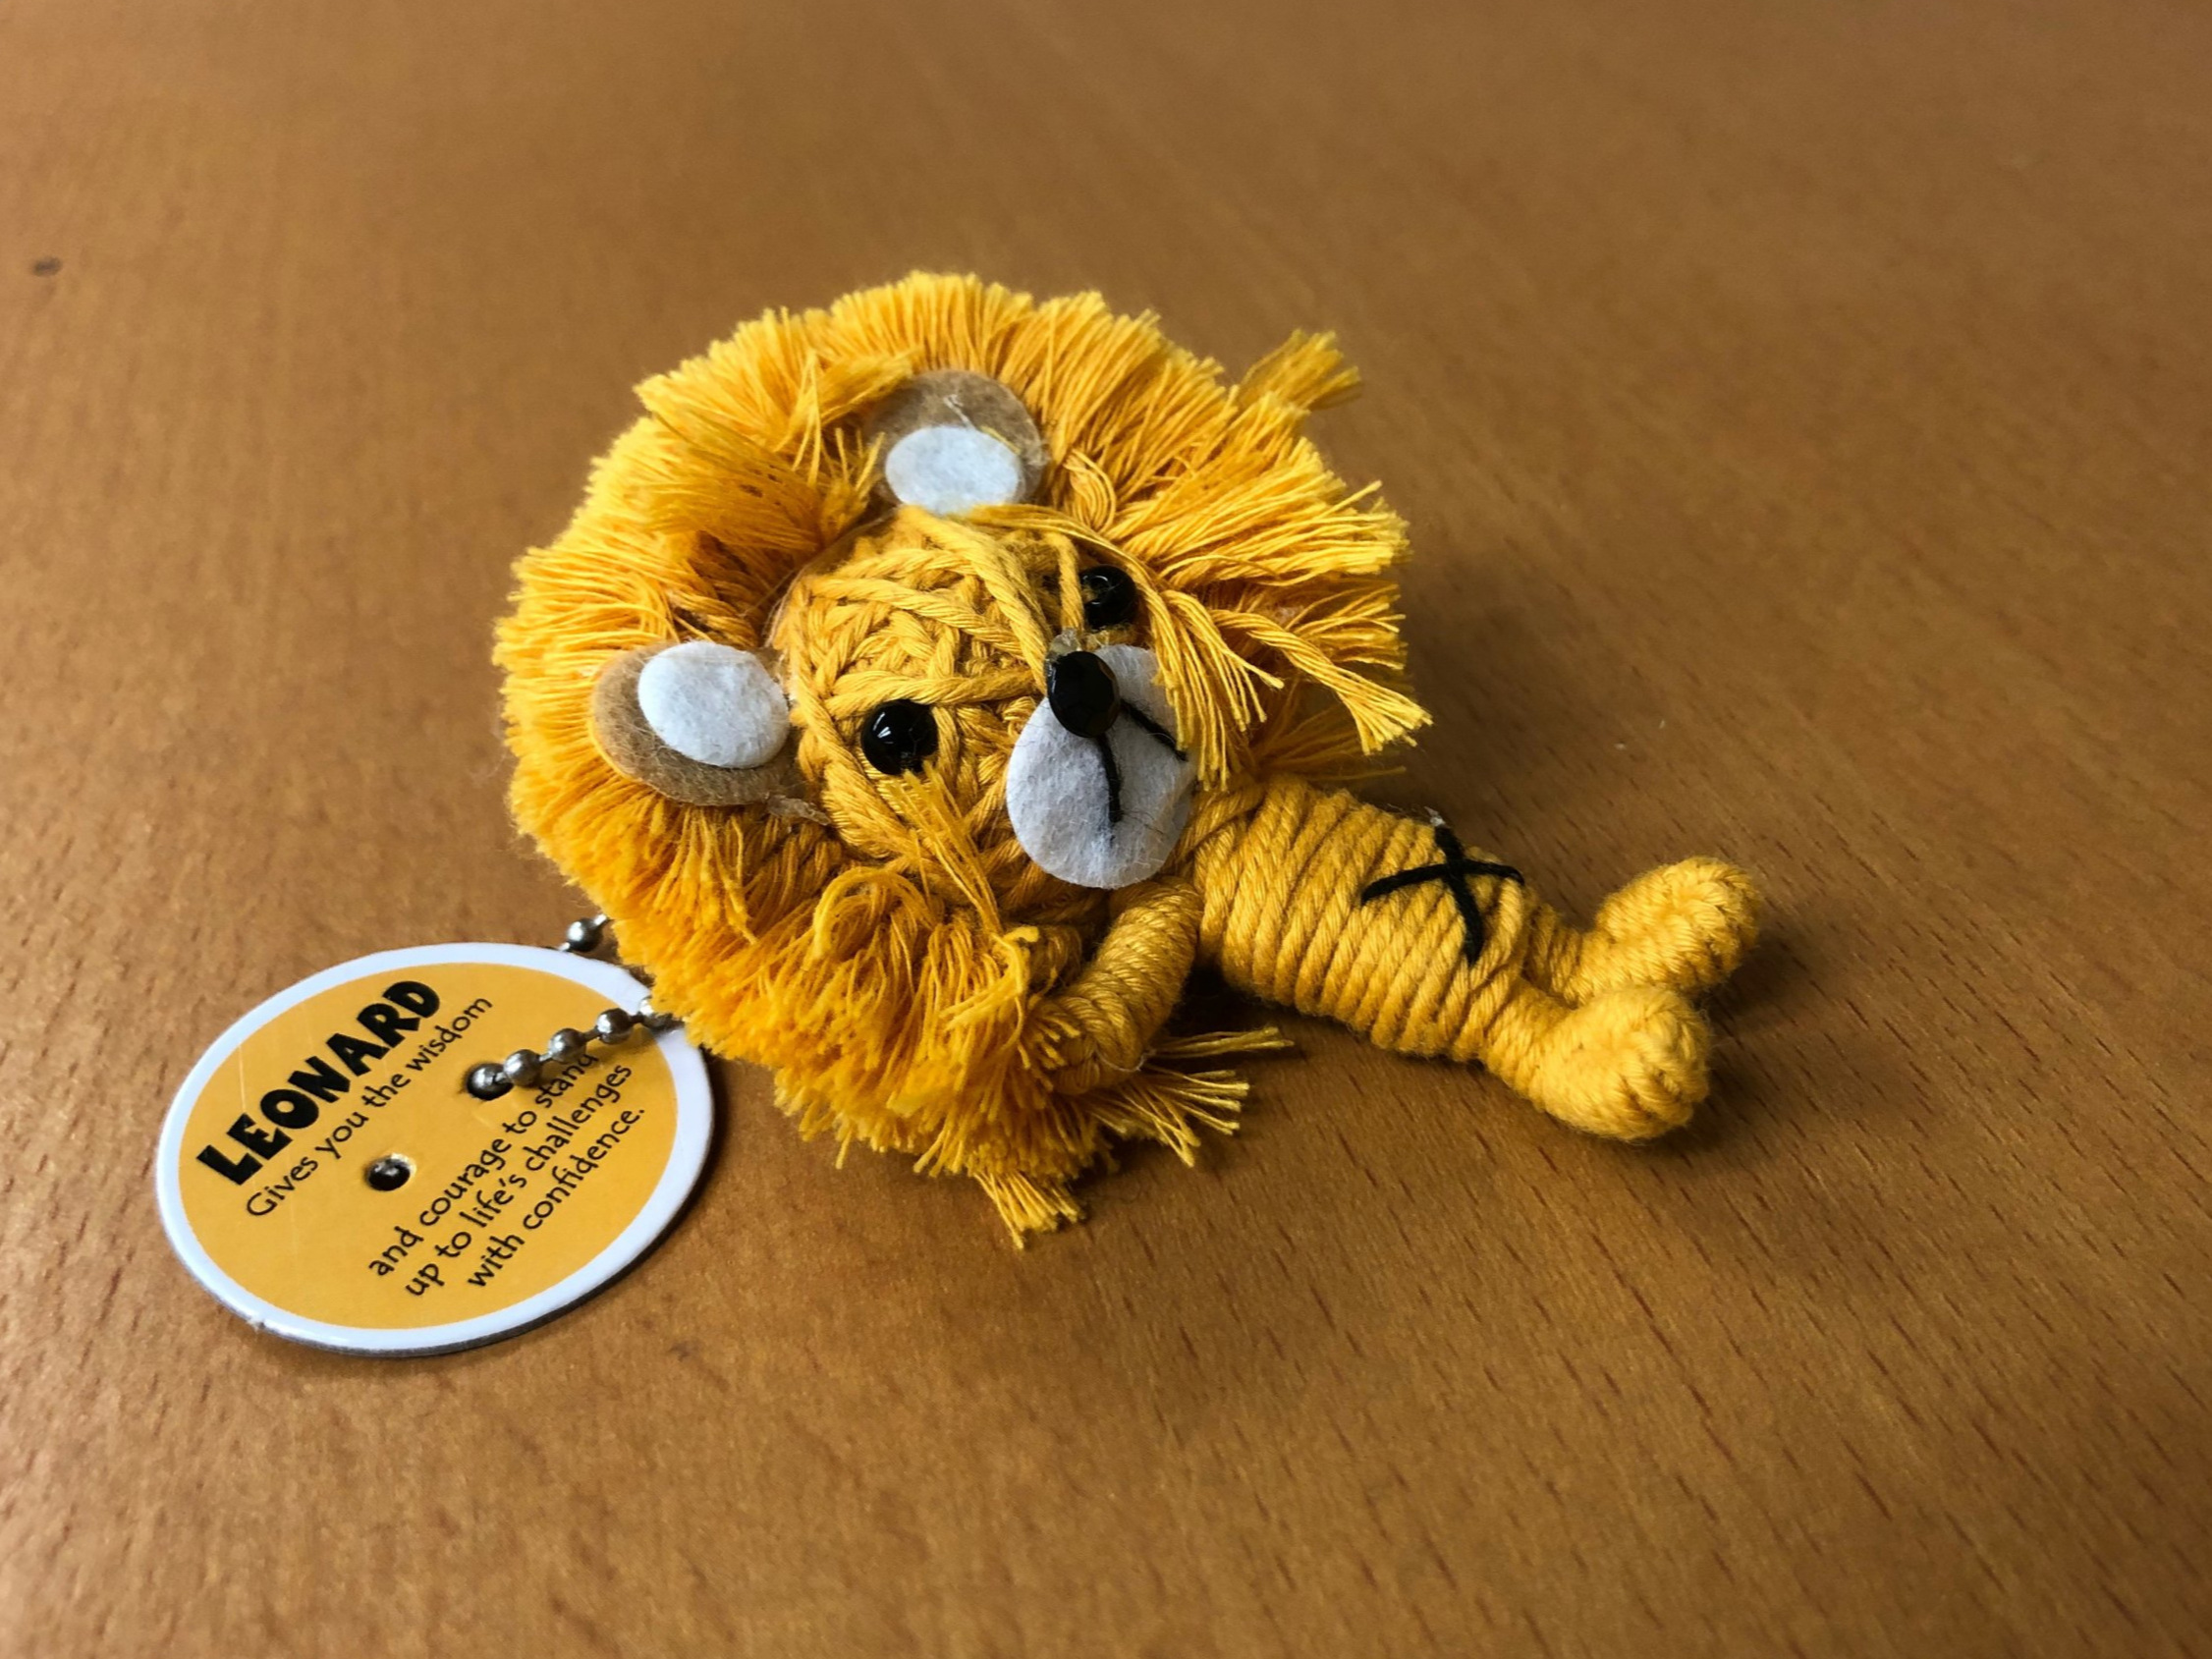  My kids gave me this&nbsp;Leonard the Lion doll, a totem of courage, and entirely appropriate as we leave 2018 behind. 